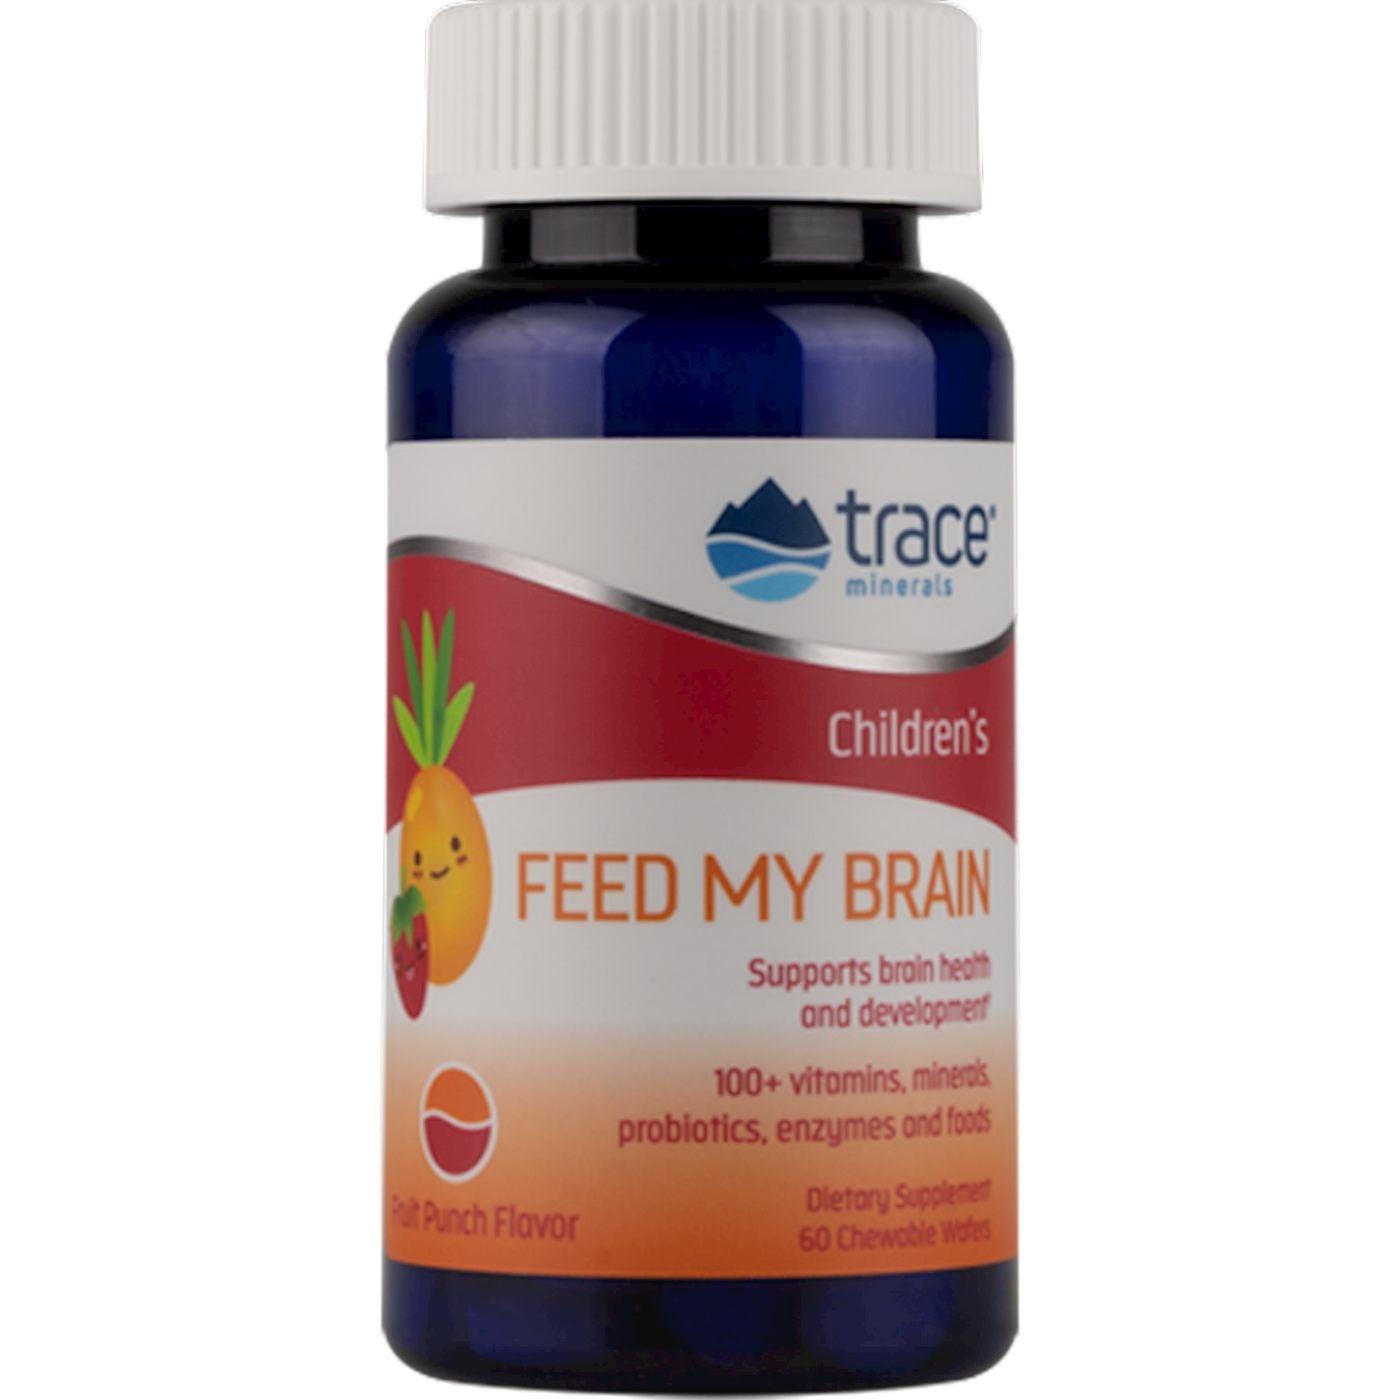 Feed My Brain for Children 60 wafers Curated Wellness